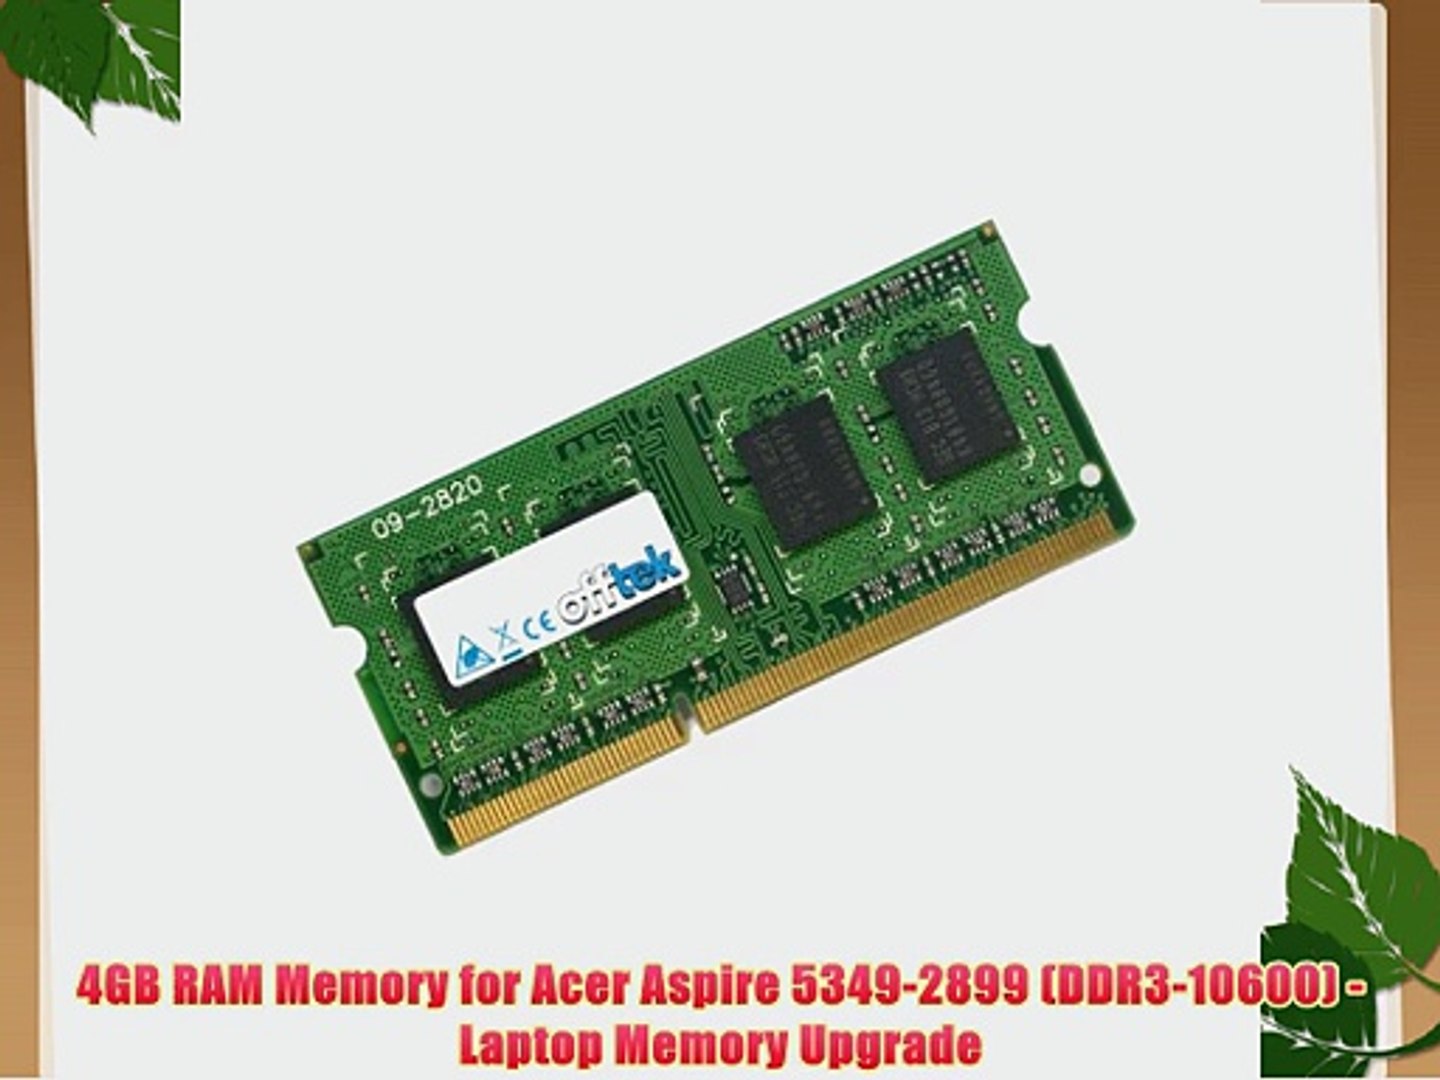 4GB RAM Memory for Acer Aspire 5349-2899 (DDR3-10600) - Laptop Memory  Upgrade - video Dailymotion